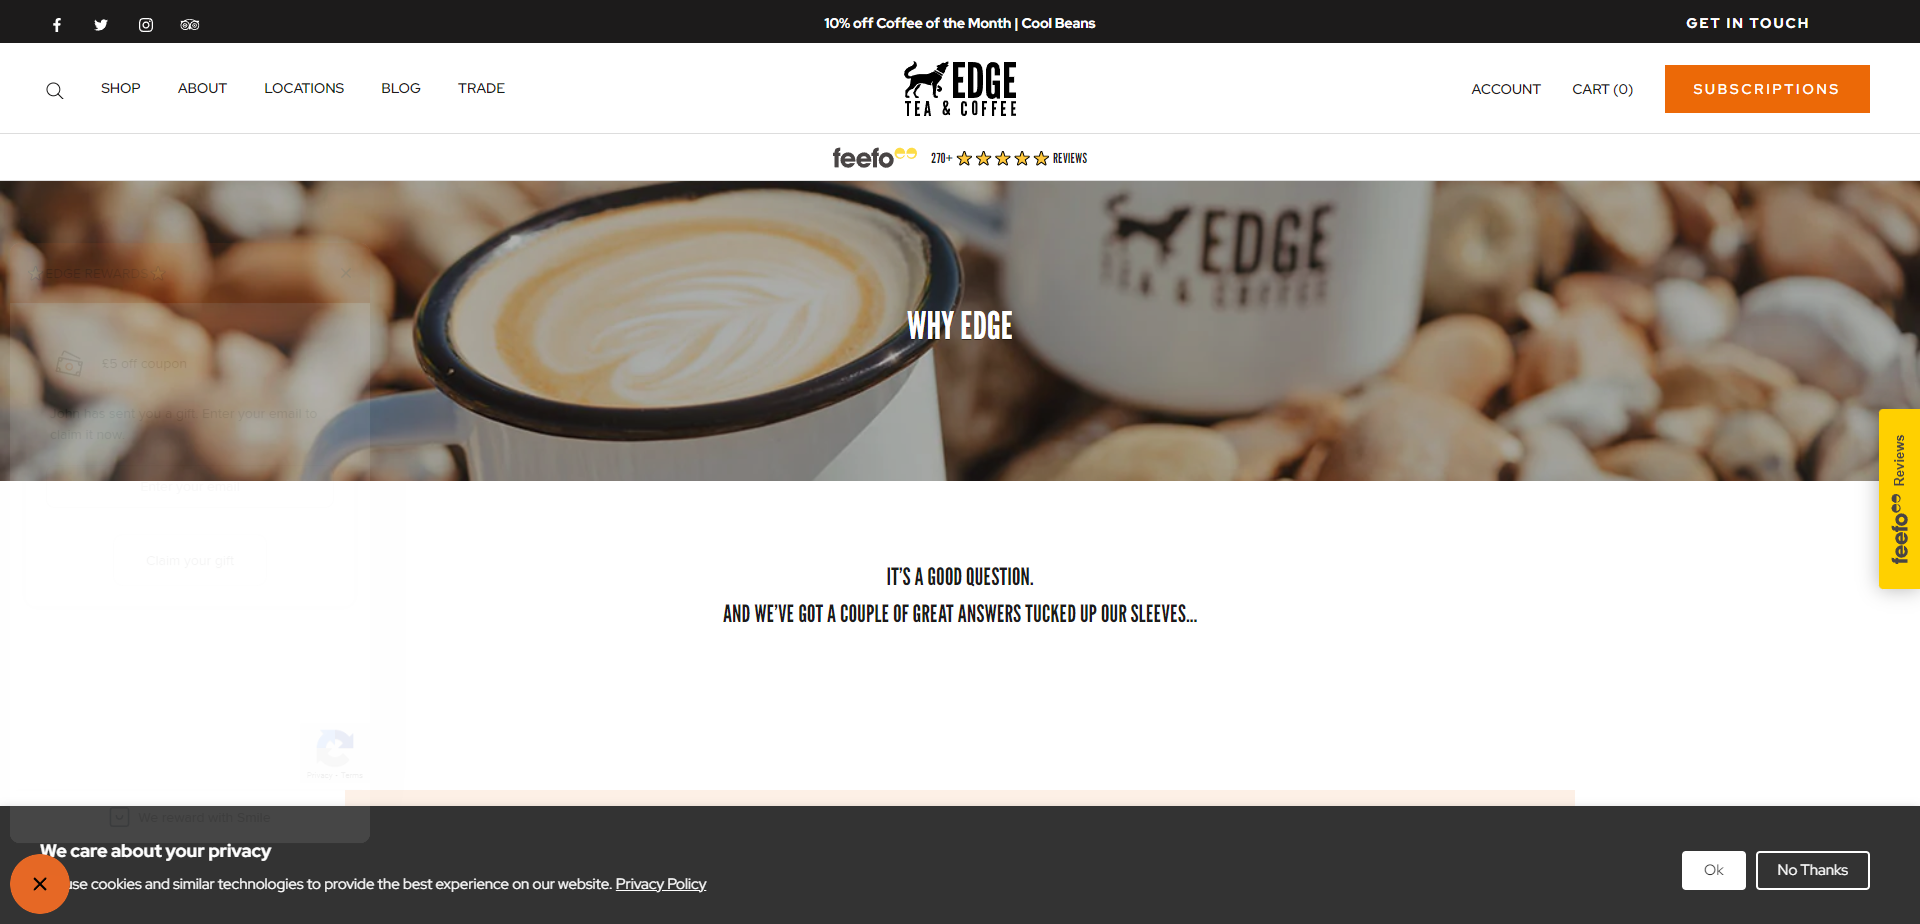 Landing Page for Edge Tea and Coffee